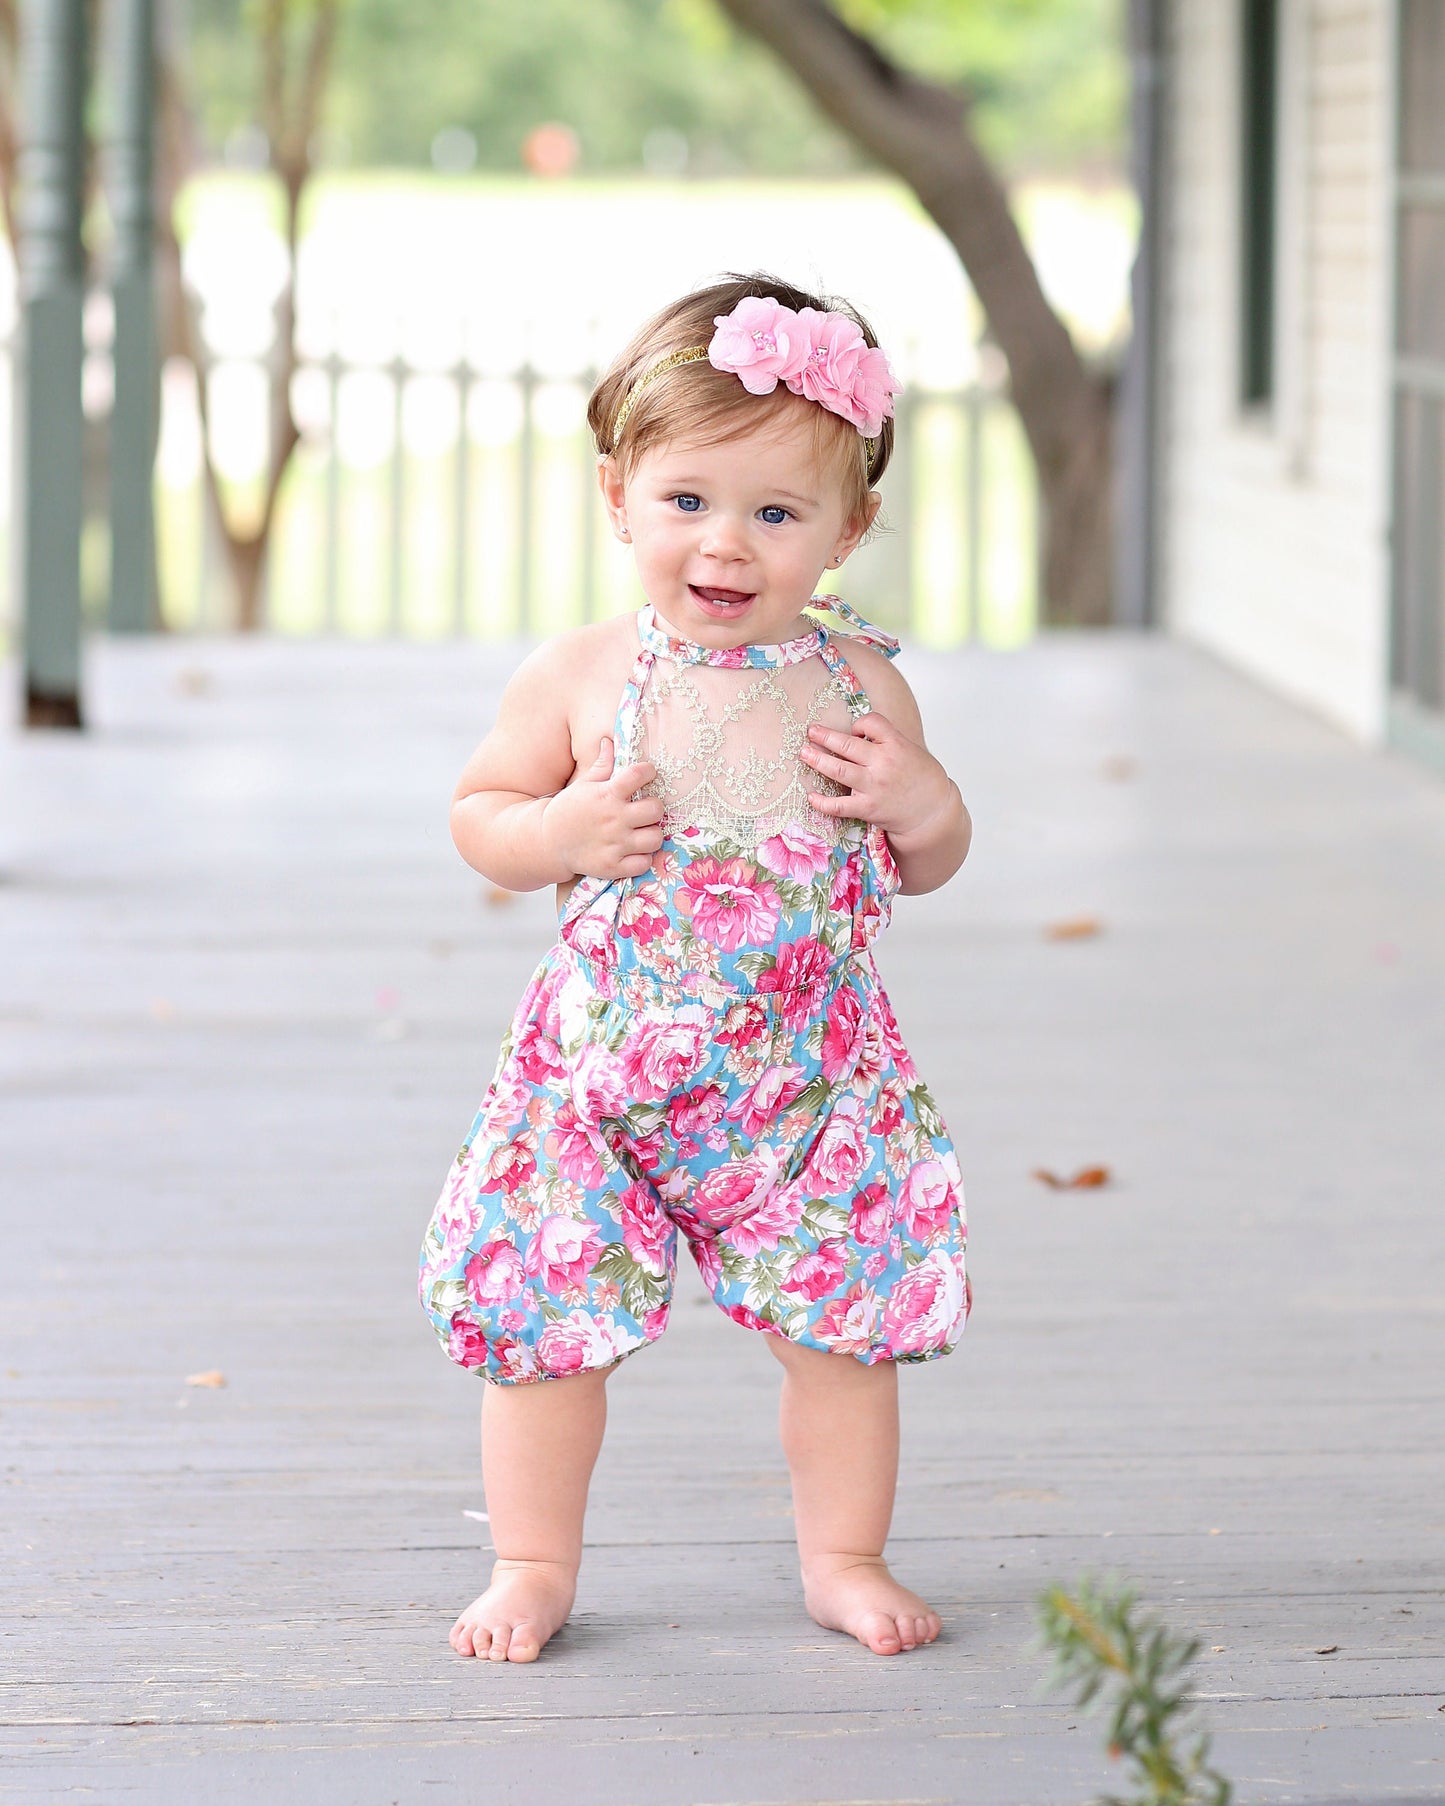 Teal Floral Baby Toddler Romper- Baby Gift, Toddler Romper, Baby Gift, Toddler Gift, Toddler Outfit, Baby Outfit, Girl Birthday Gift, Baby